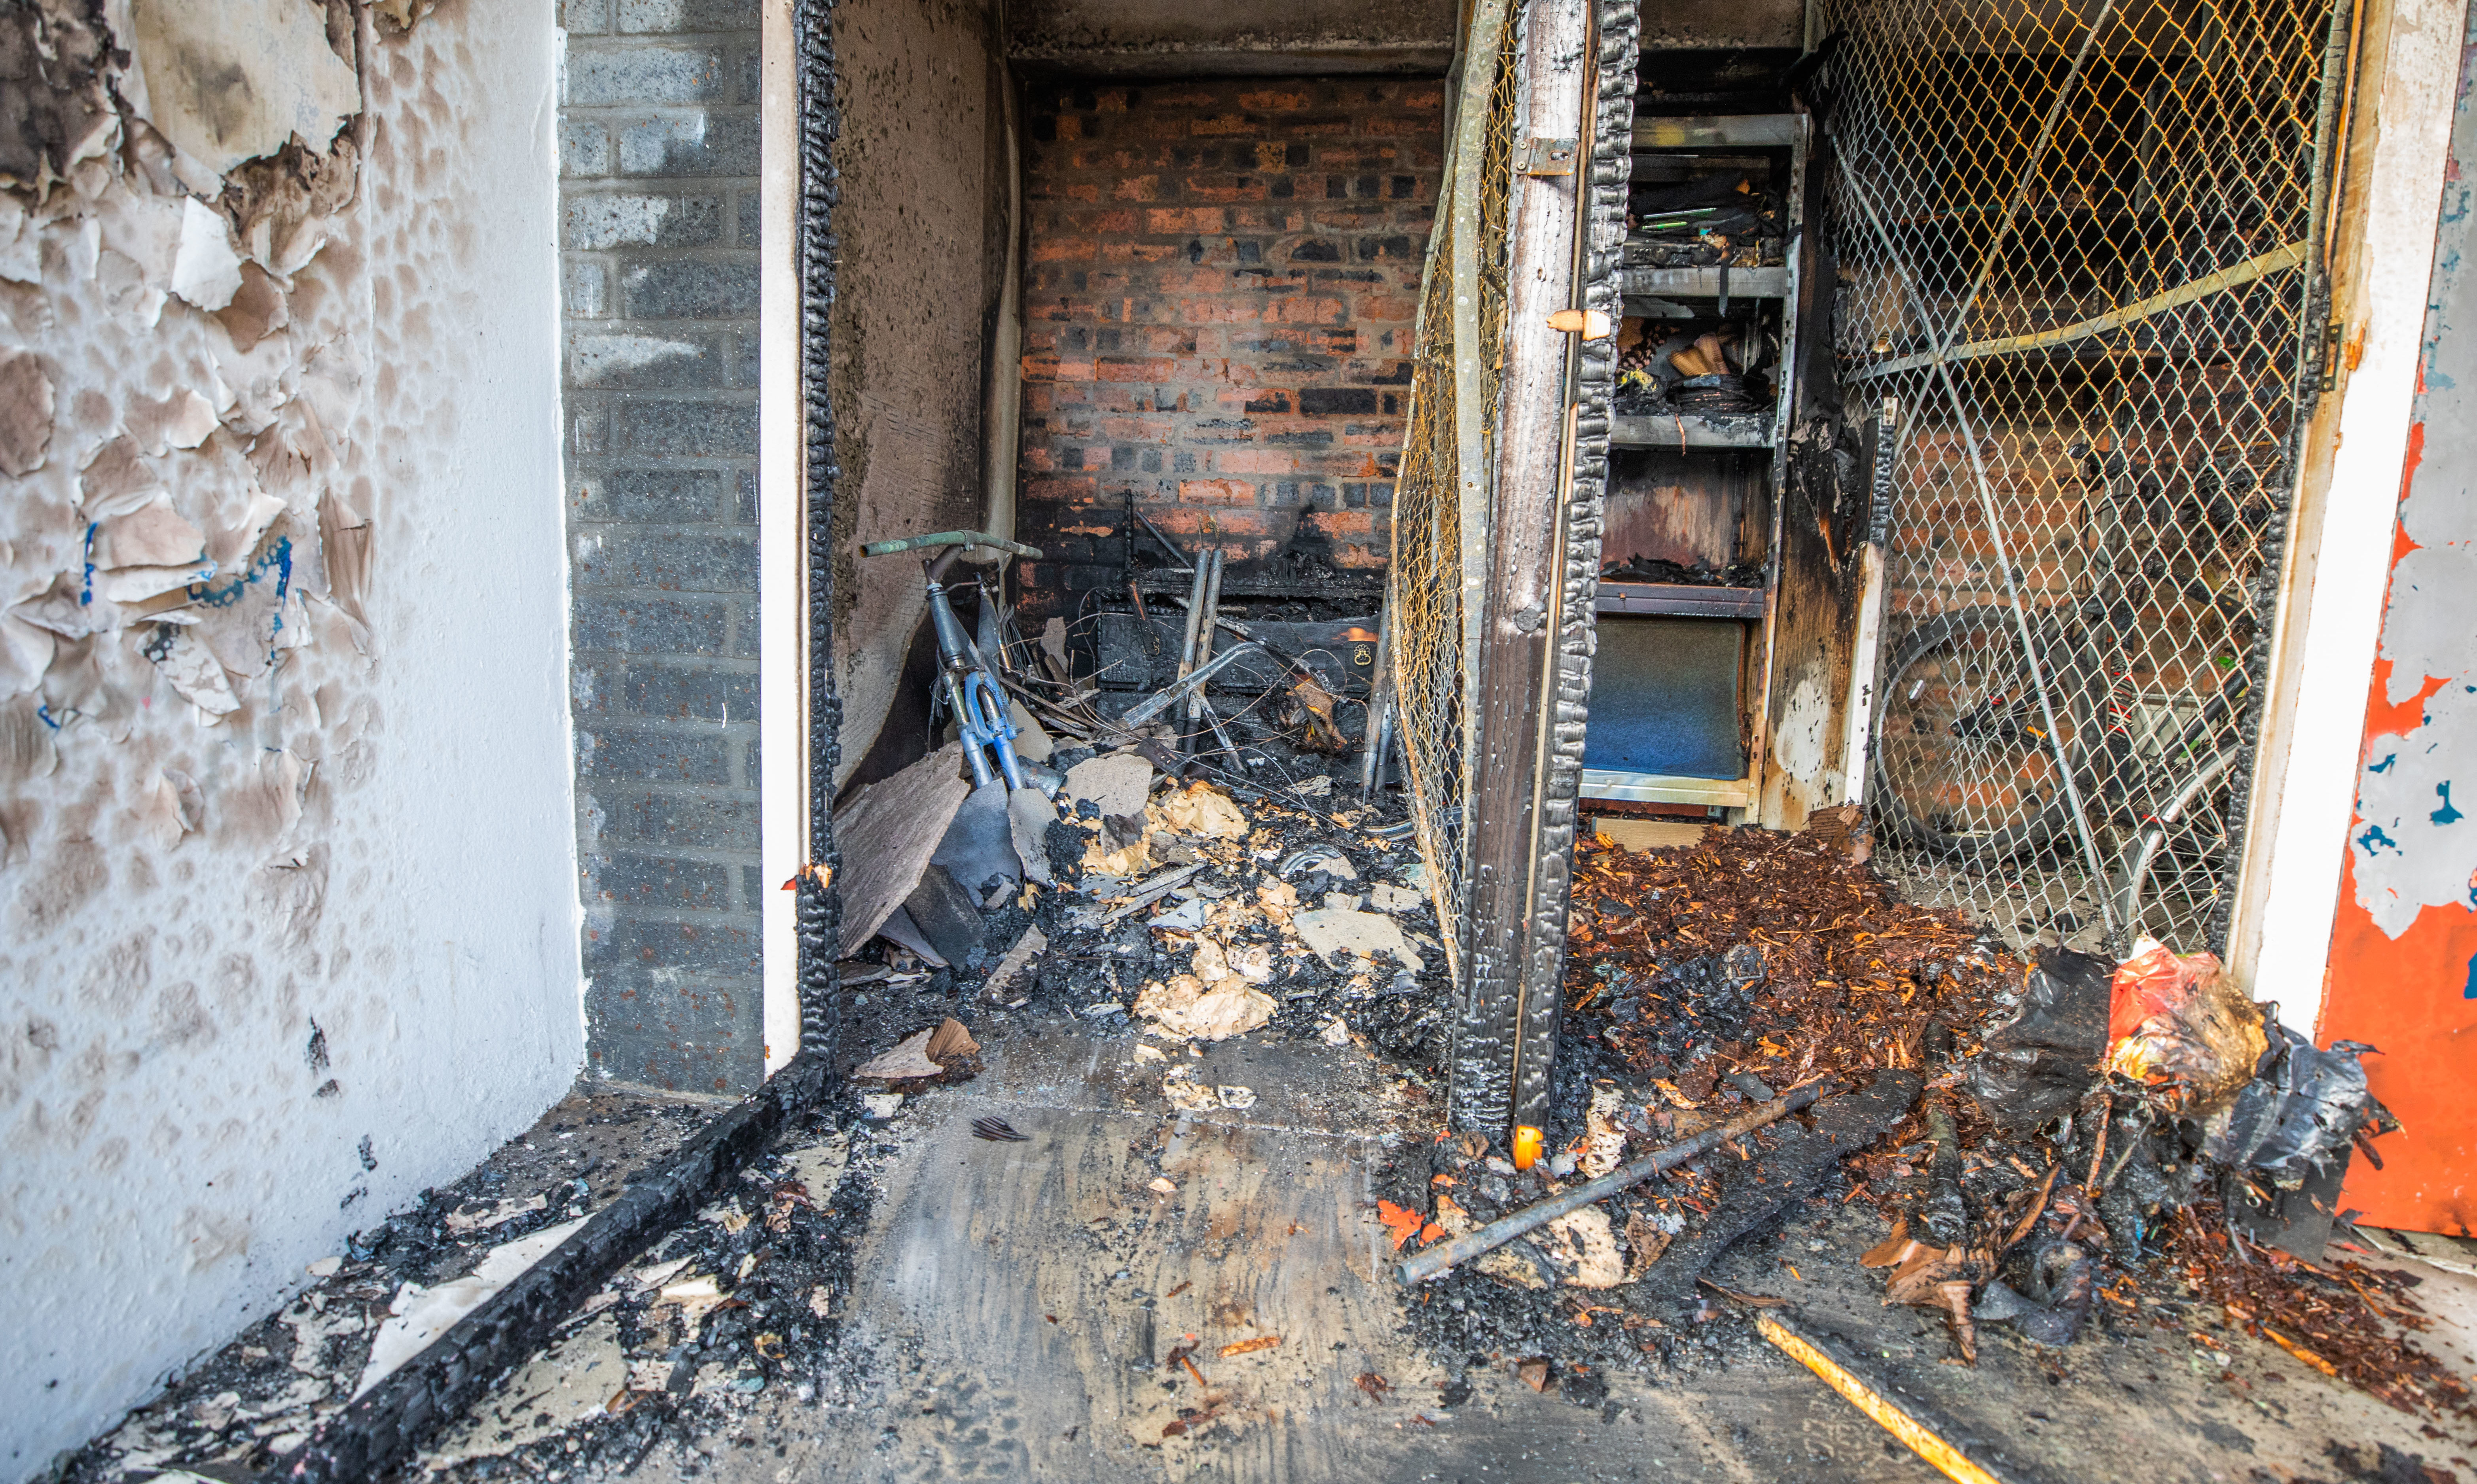 Items belonging to residents were destroyed in the fire.